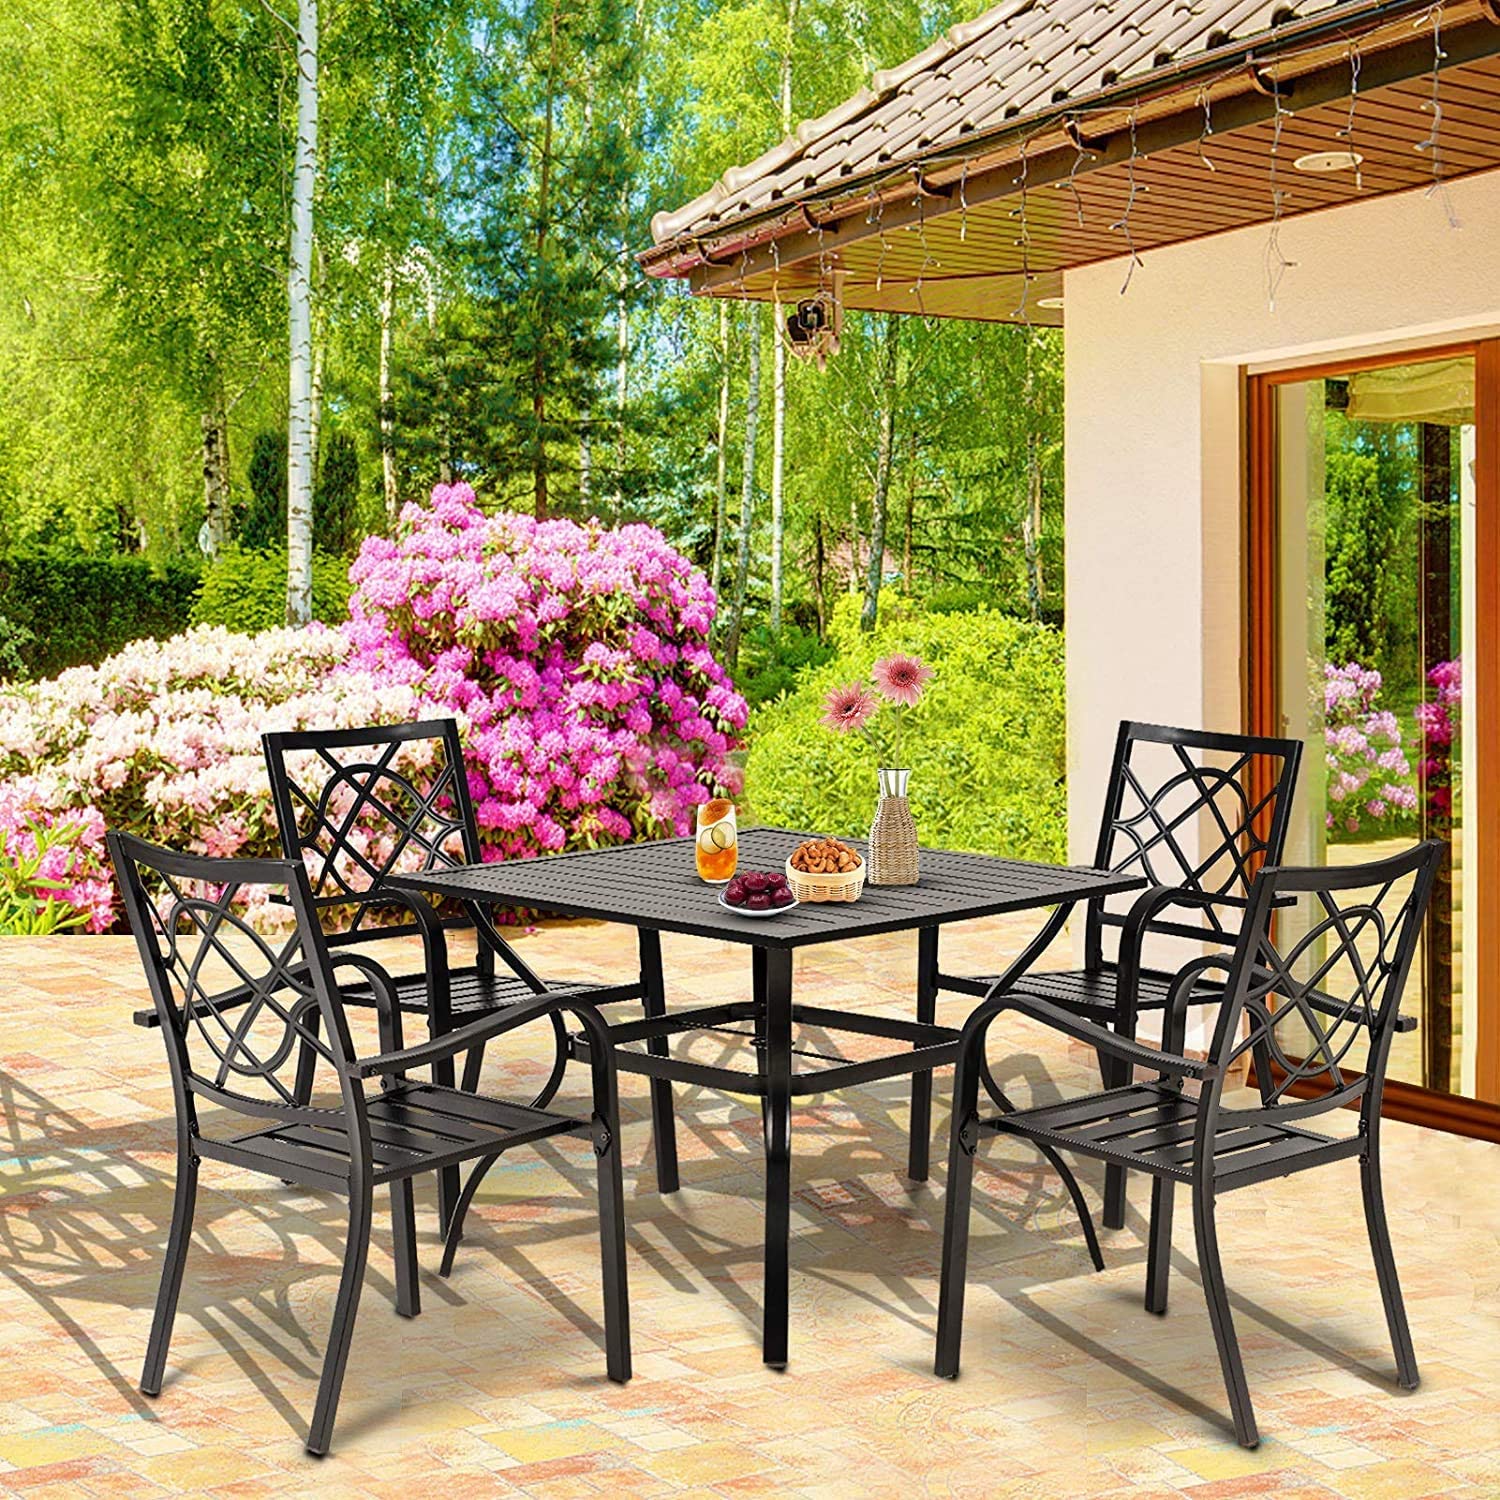 SOLAURA Outdoor Patio Stackable Wrought Iron Dining Chairs Set of 4- Black - image 5 of 7